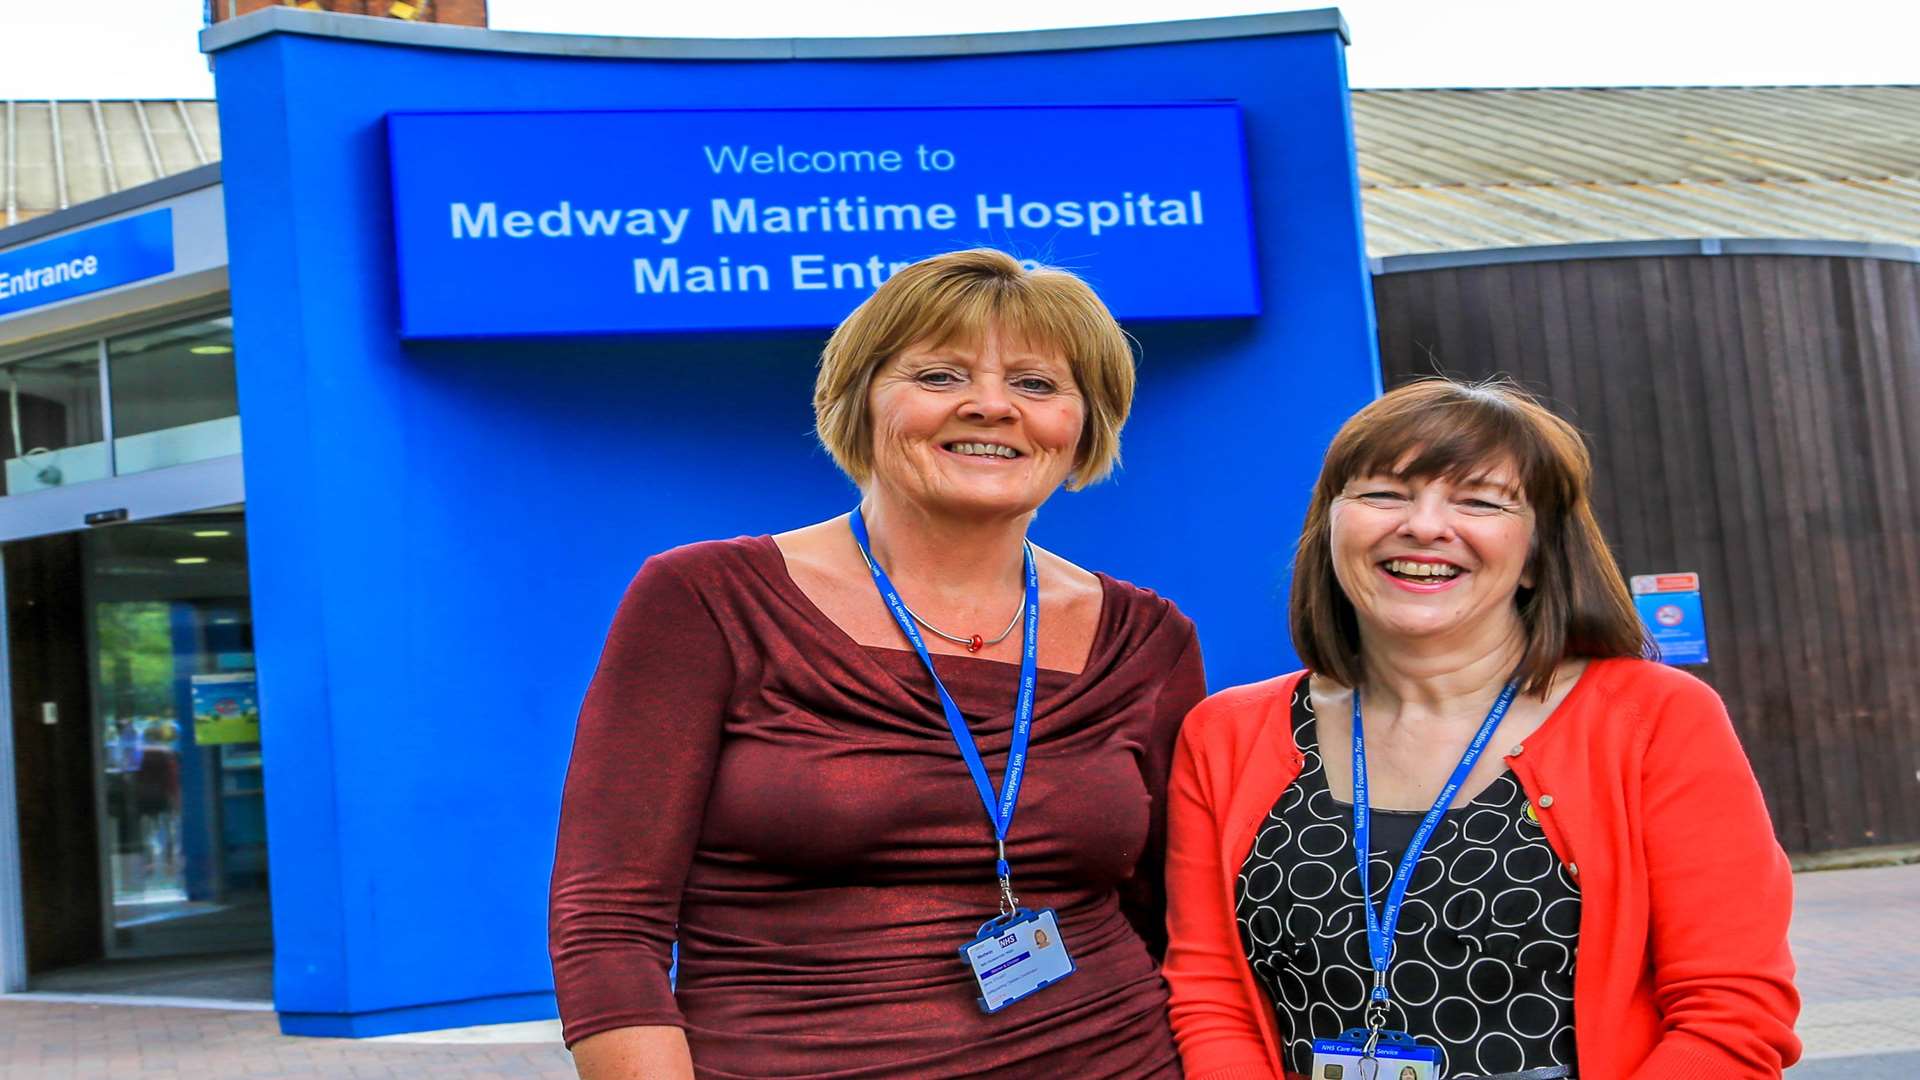 Jenny Stuart and Kim Young are celebrating 40 years of service at Medway Maritime Hospital